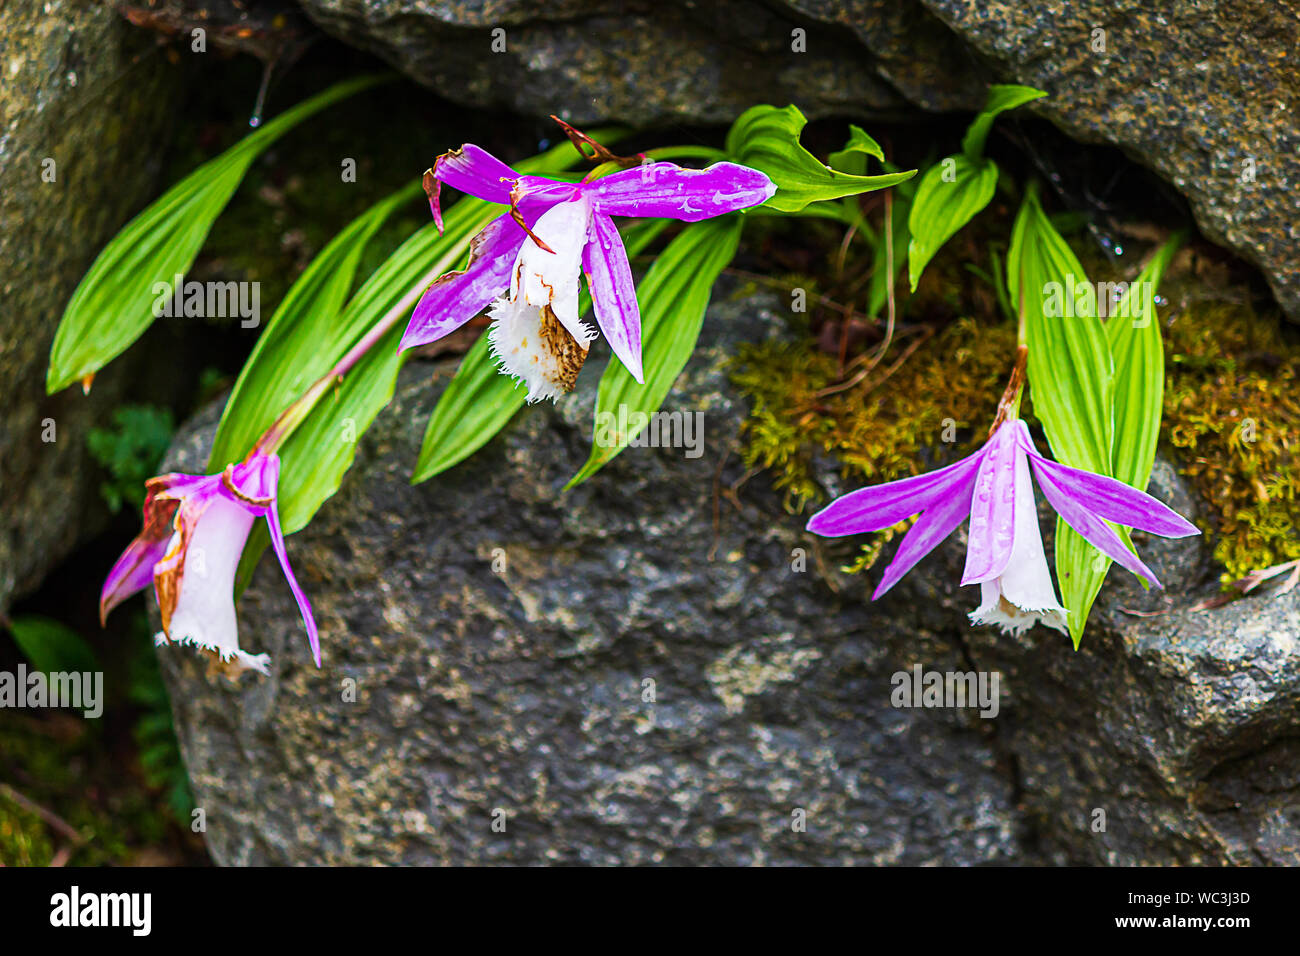 white and lavender orchid planted in crevises of a rock garden wall with moss Stock Photo